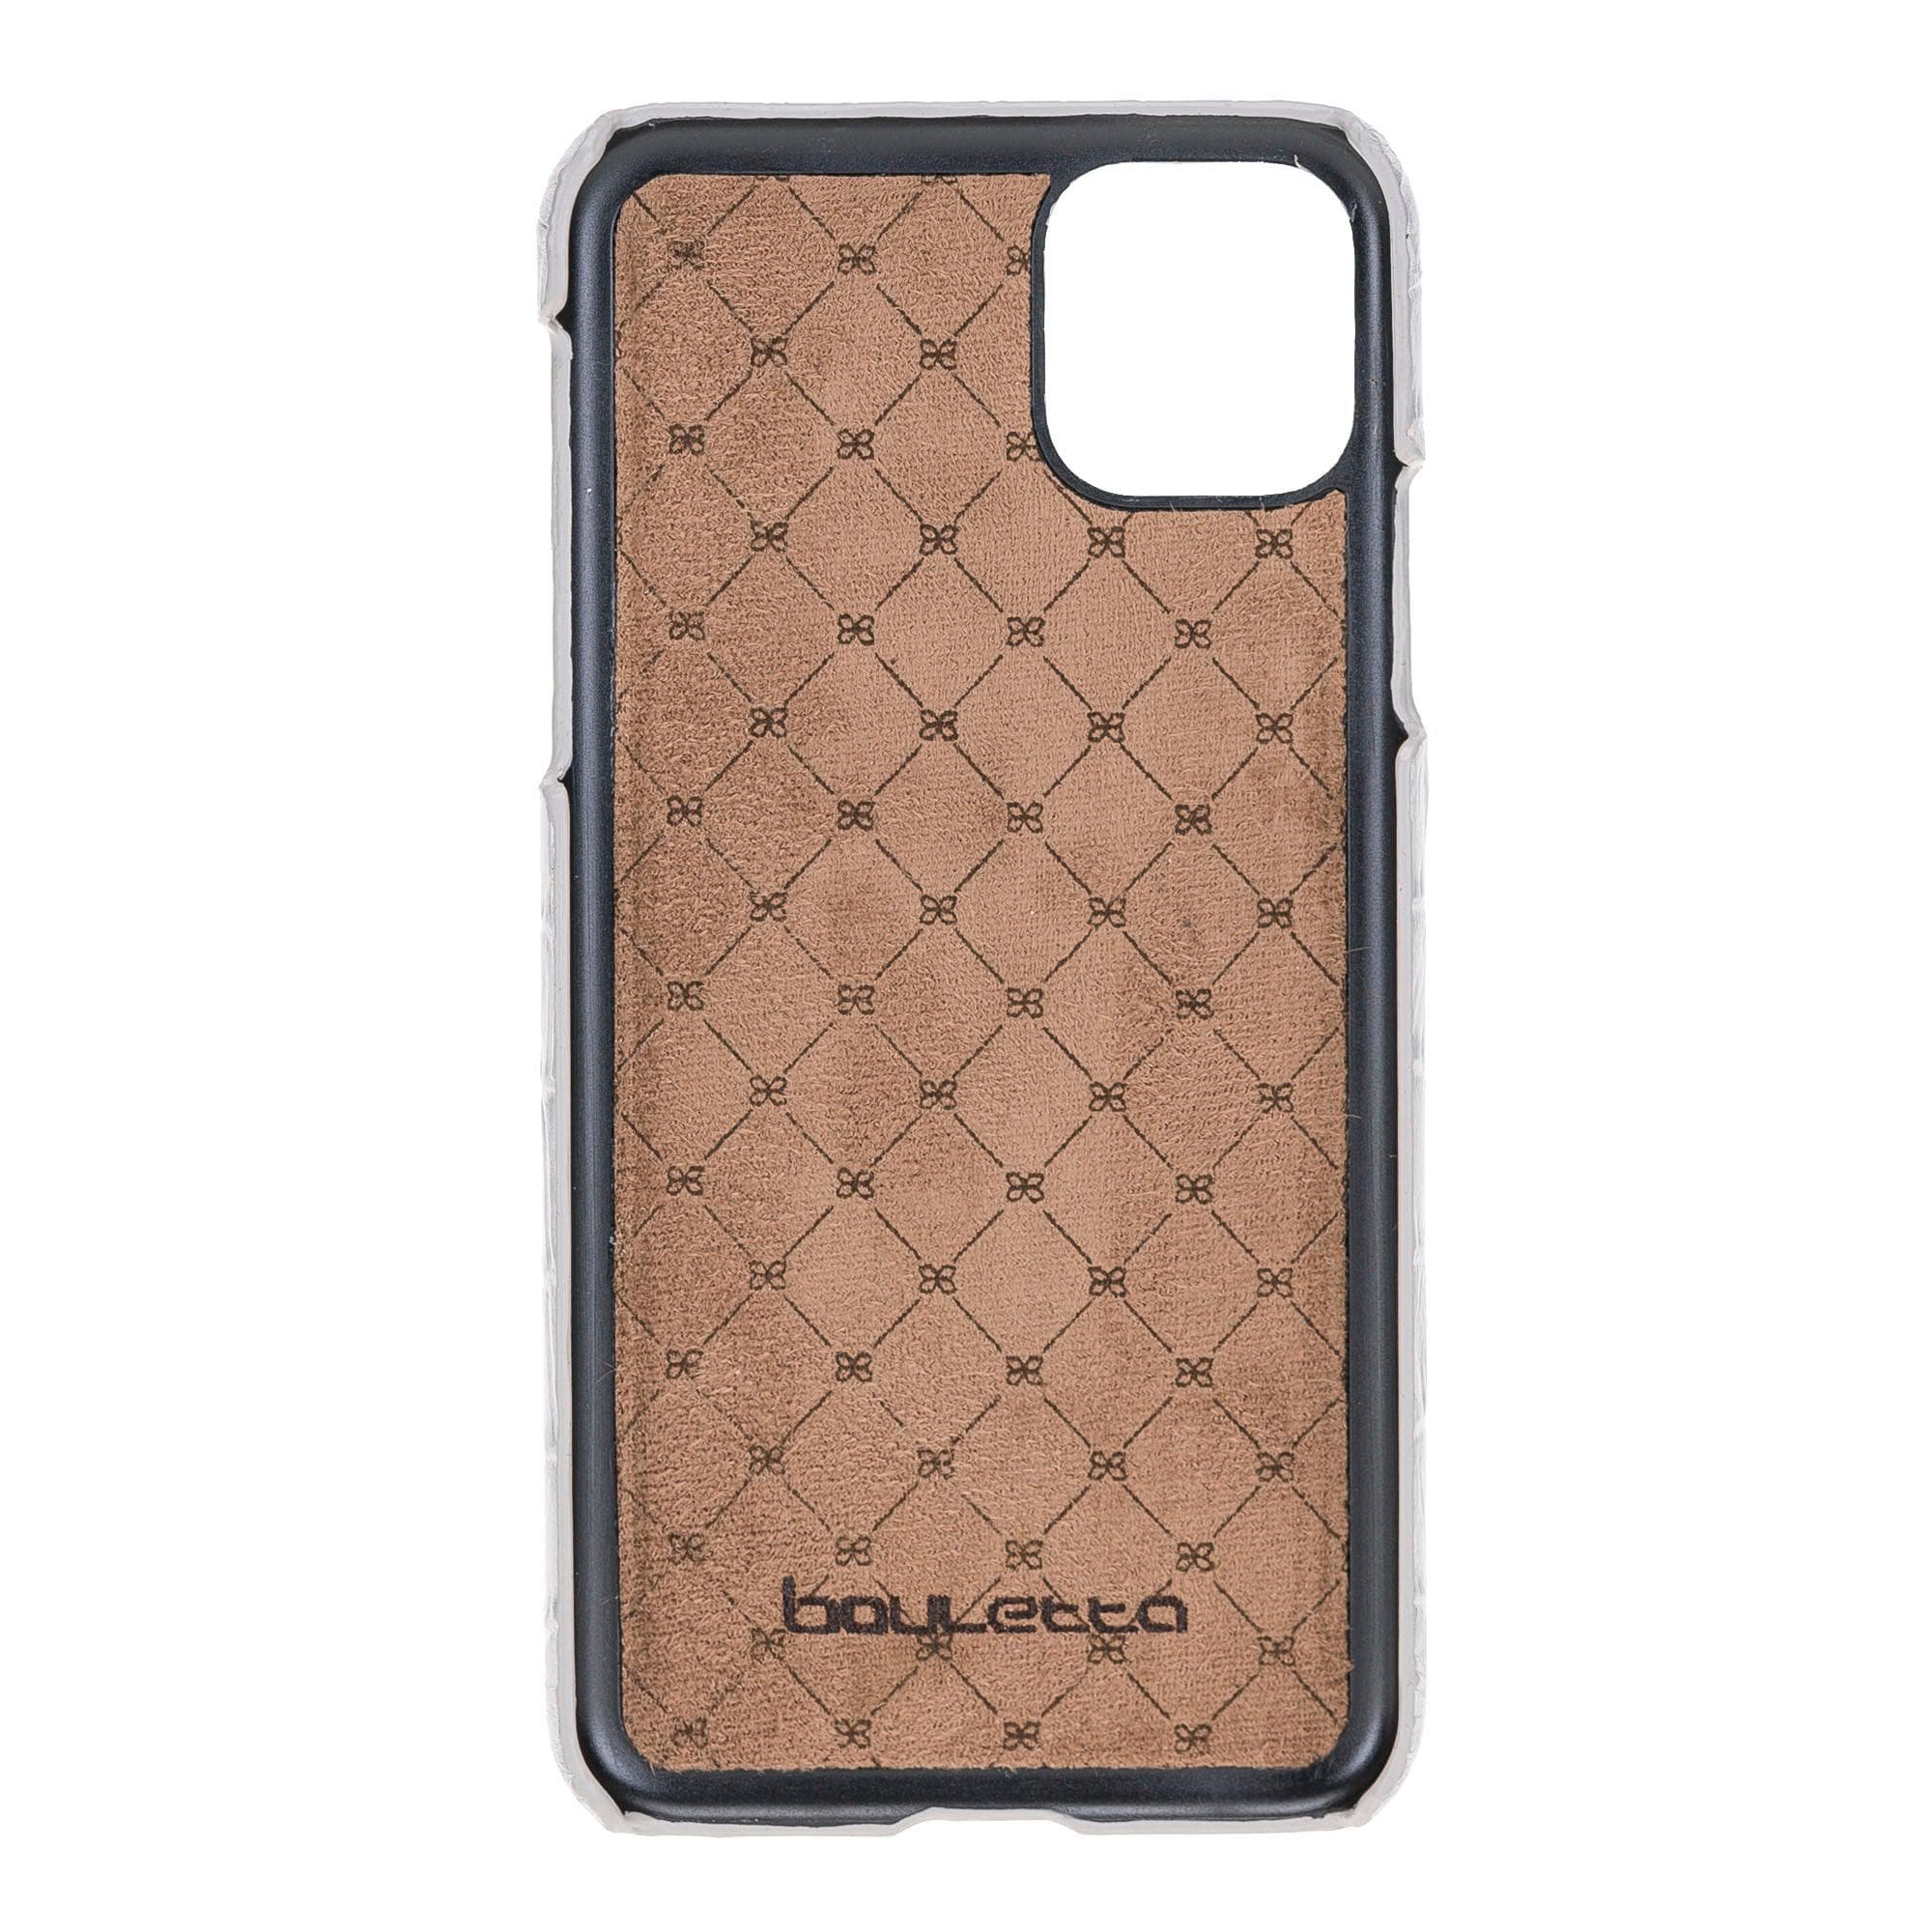 Apple iPhone 11 Series Leather Back Cover Ultimate Jacket model Bouletta